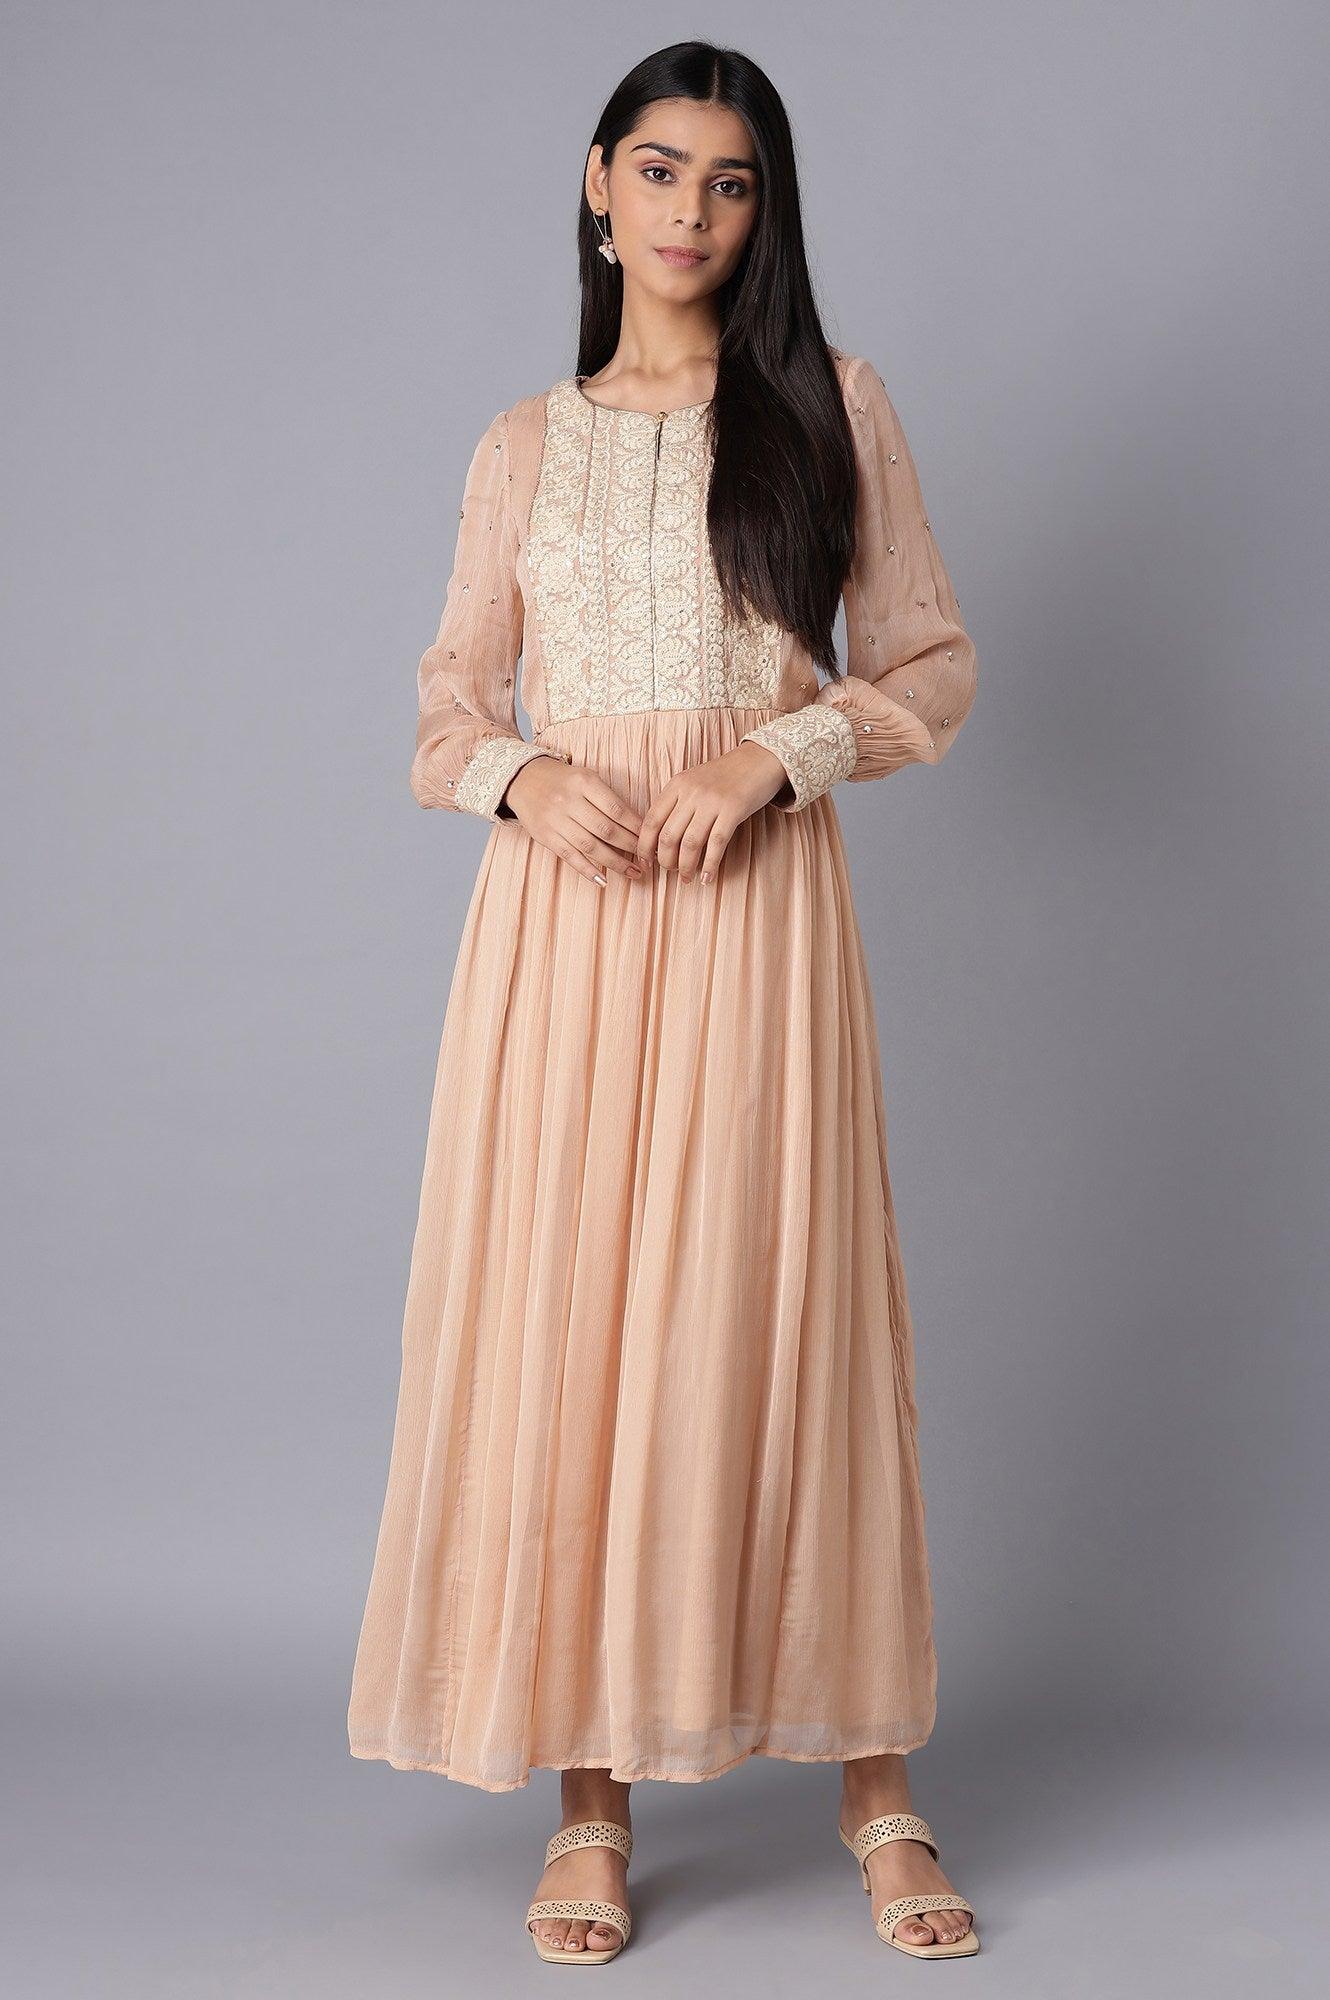 Light Pink Embroidered Victorian Dress with Gathered Sleeves - wforwoman